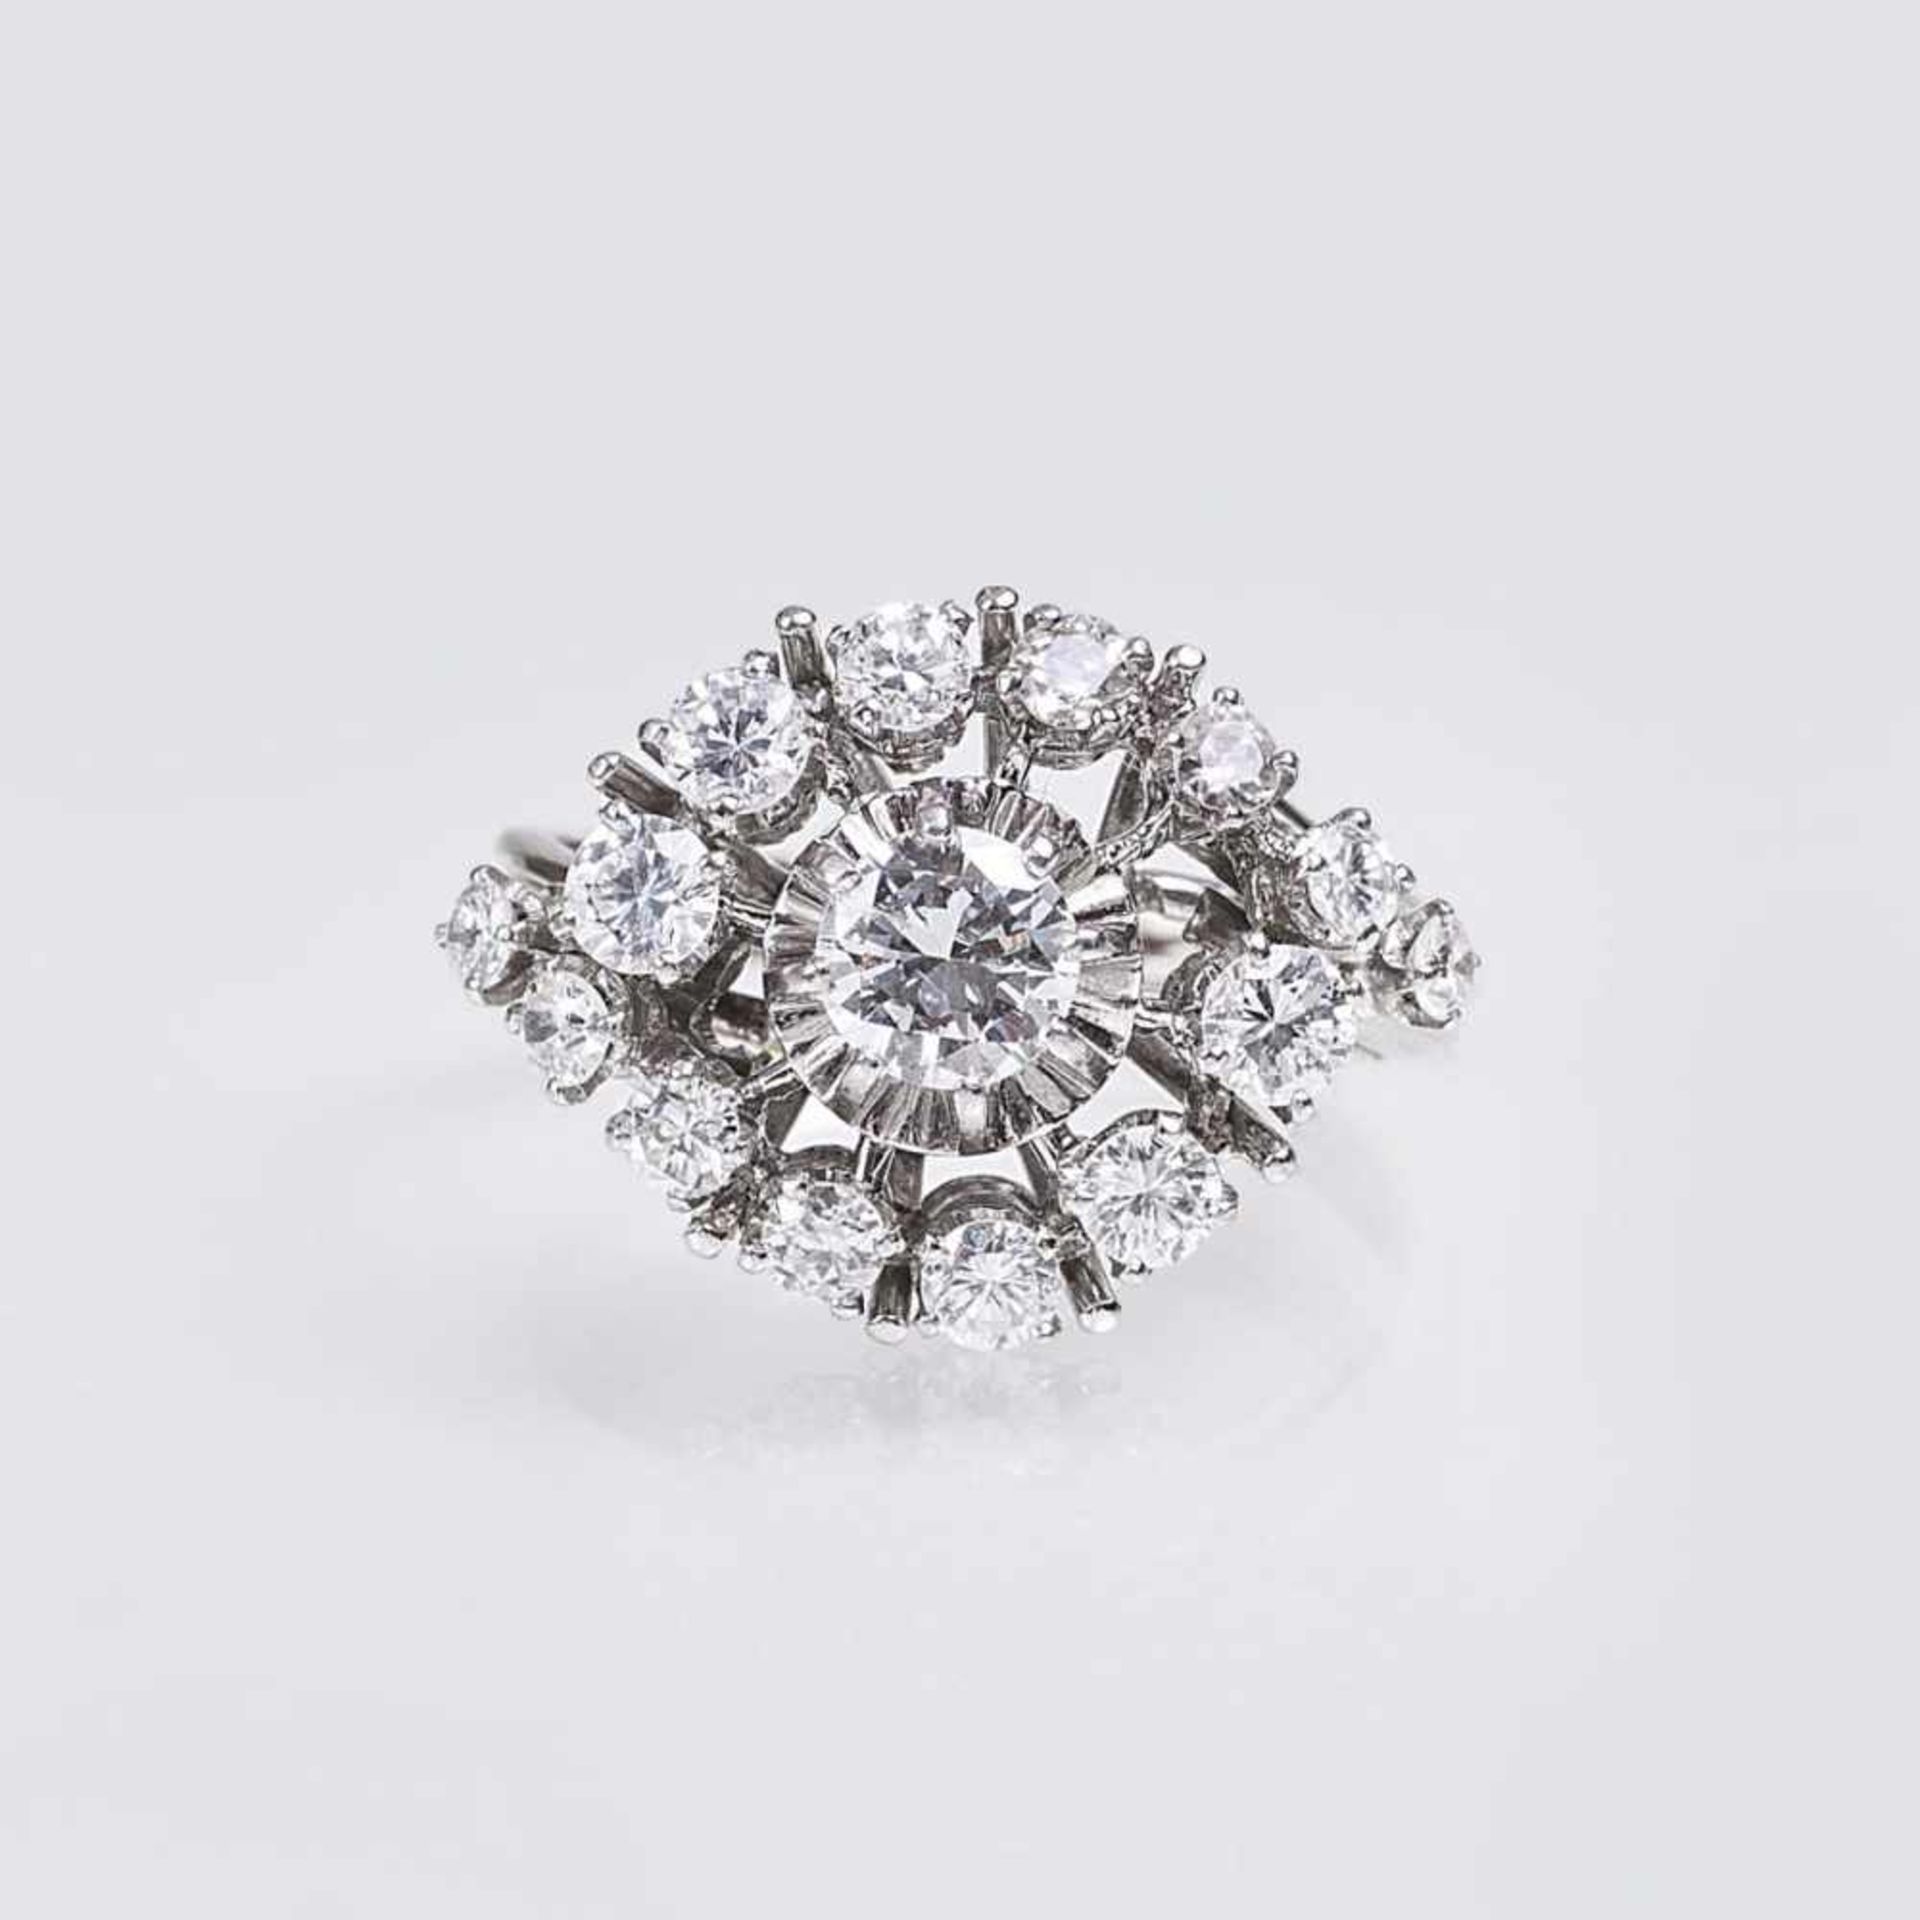 A Vintage Diamond RingMid 20th cent. 18 ct. white gold, french import mark. With 15 diam. in